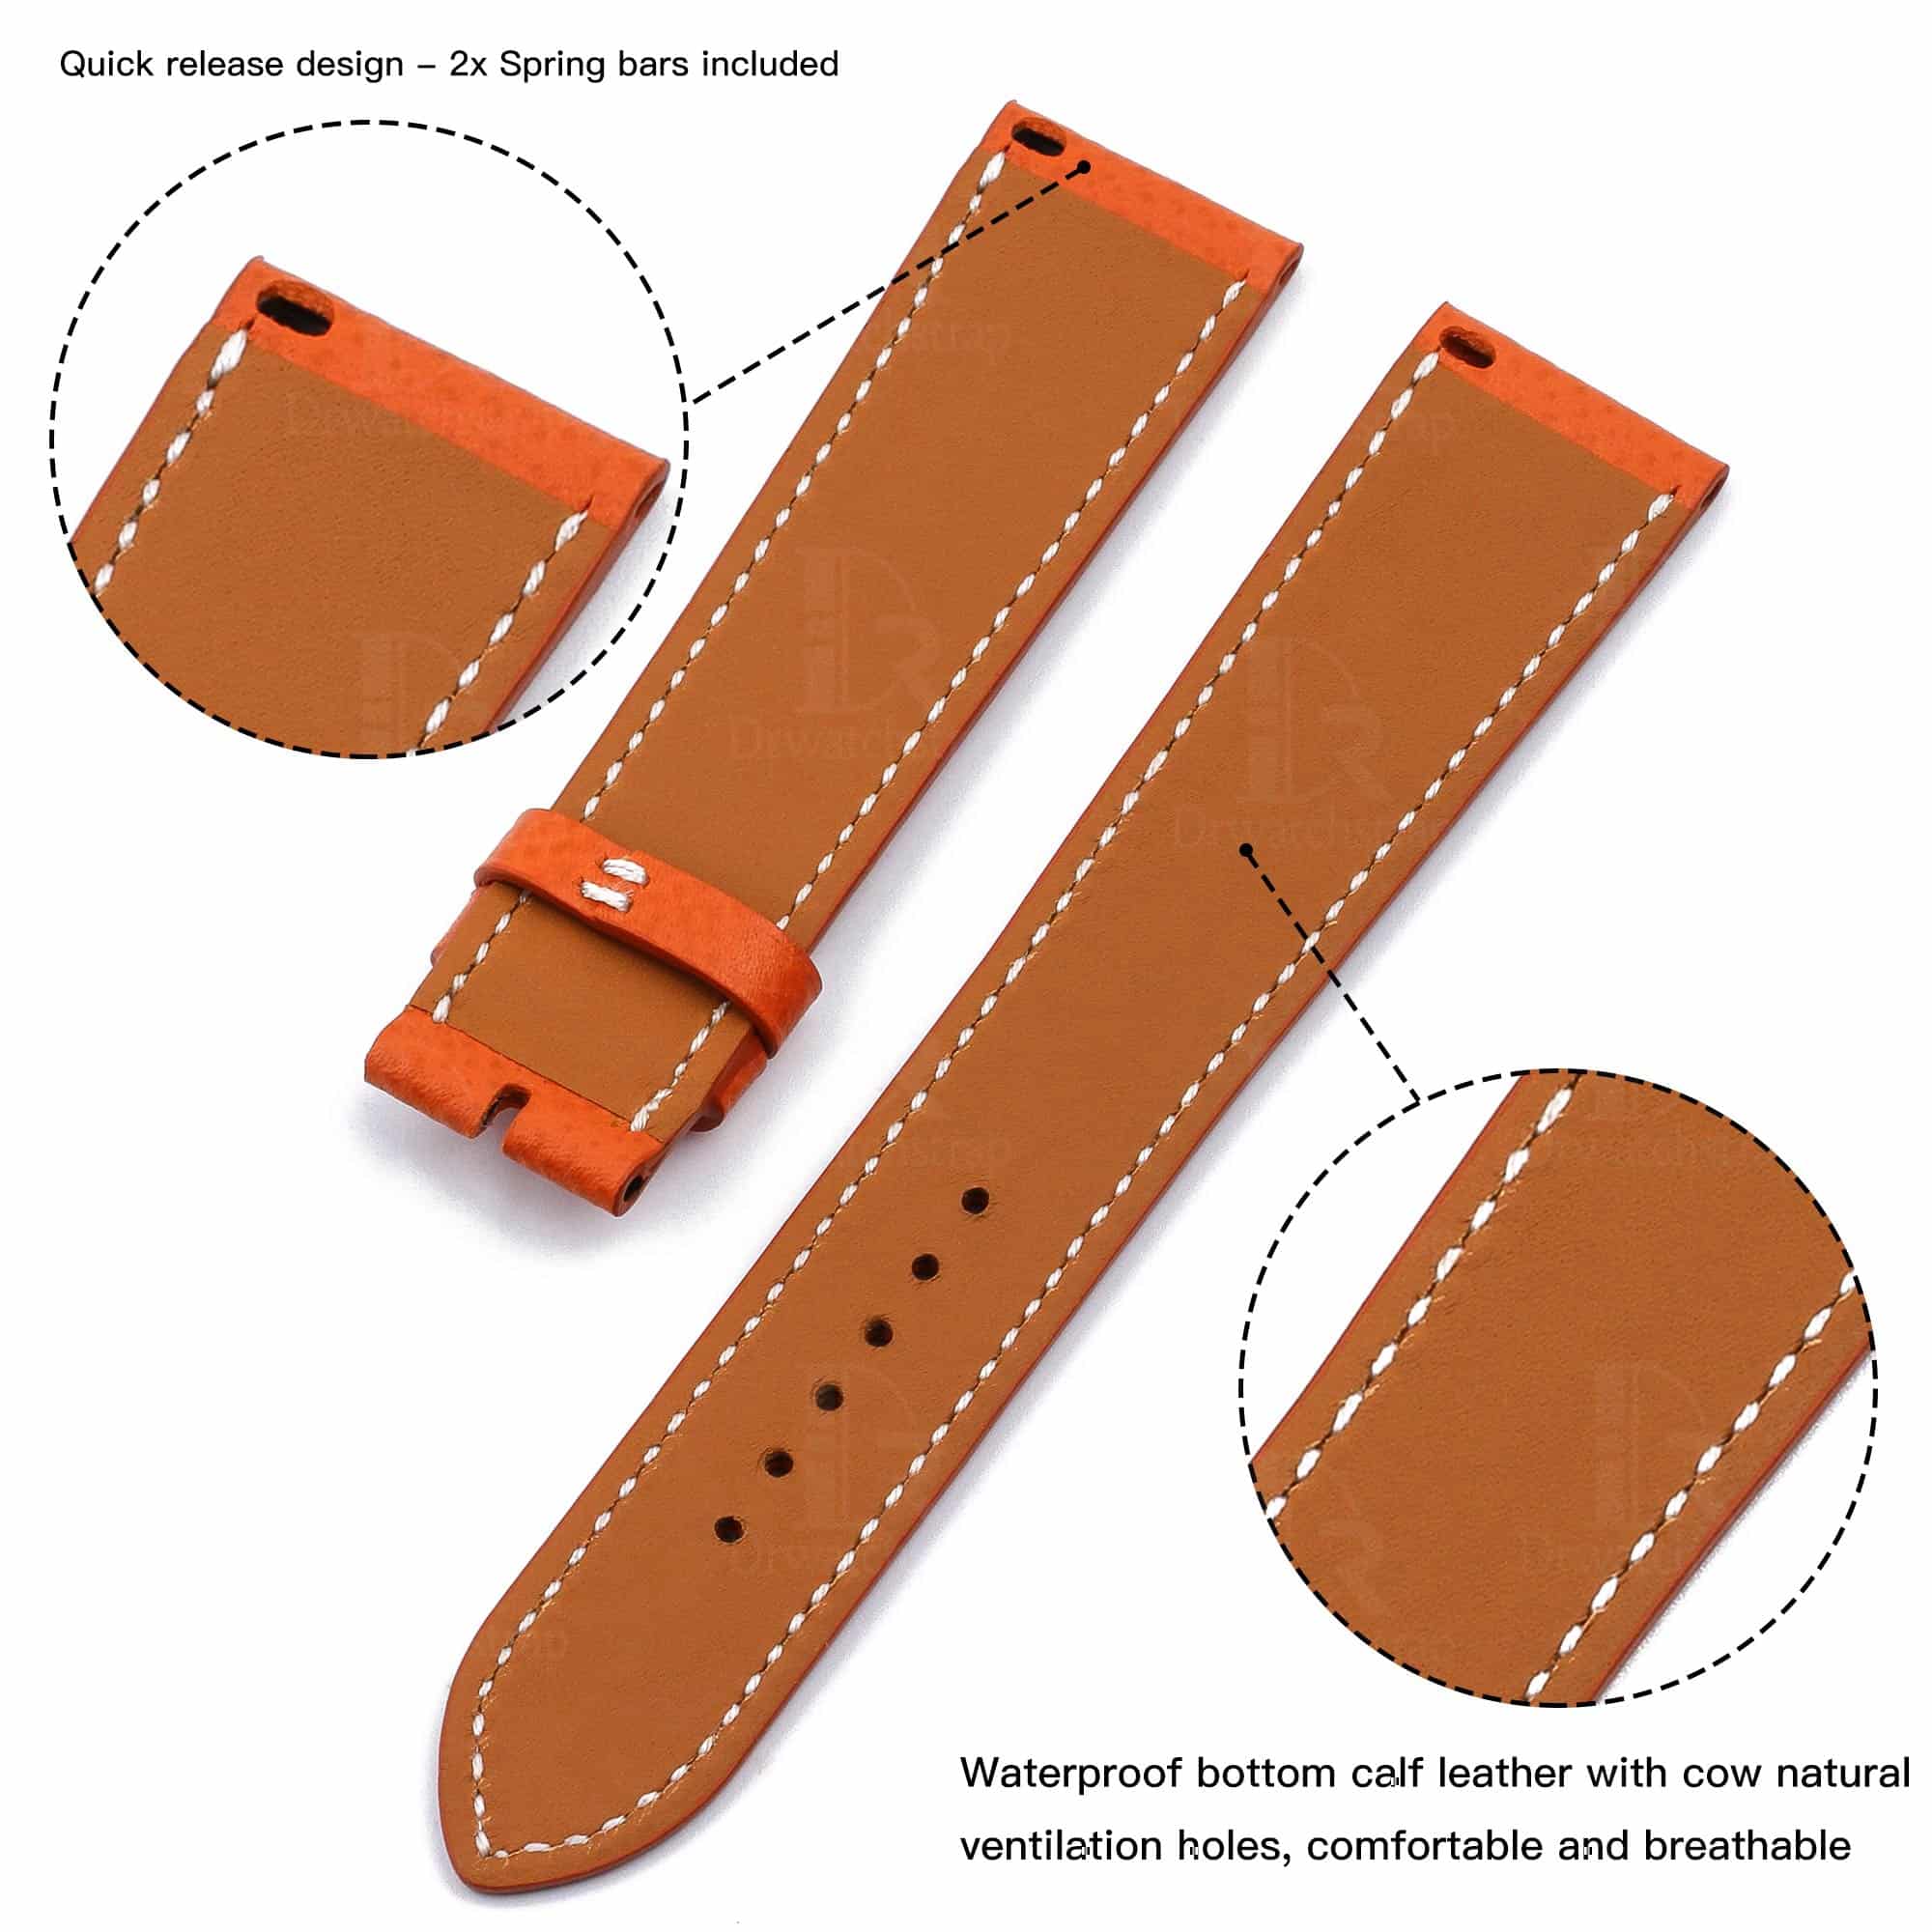 Premium high-quality Epsom orange calfskin leather Hermes watch band and strap for Hermes Heure H Cape Cod luxury watch - orange sport band - Shop Single tour watch bands online for sale at low price